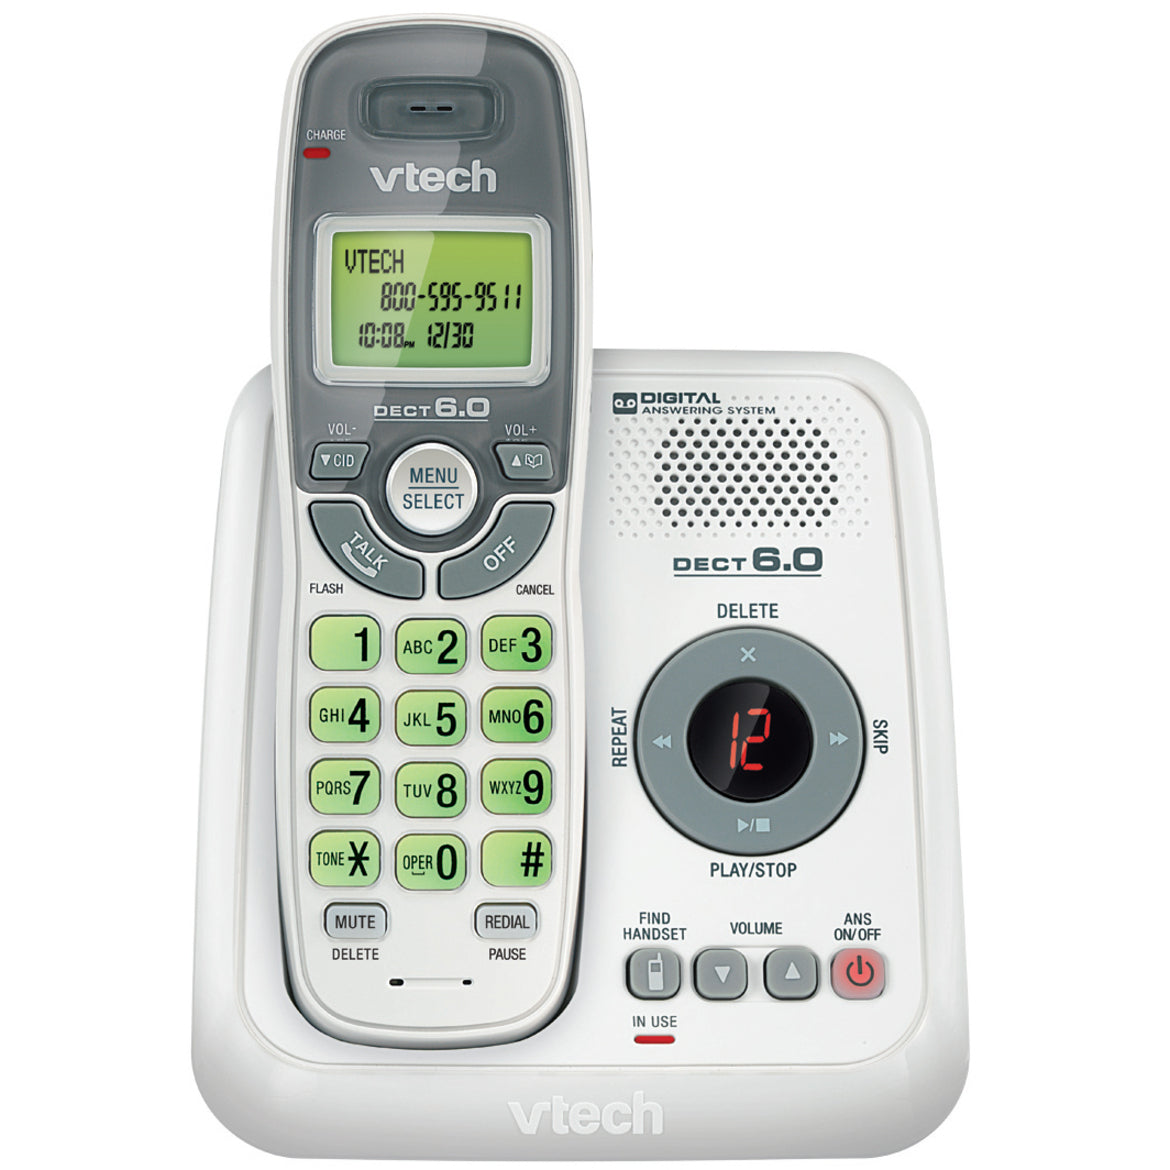 VTech CS6124 Cordless Phone with Answering Machine, Caller ID, LCD Screen, Backlight